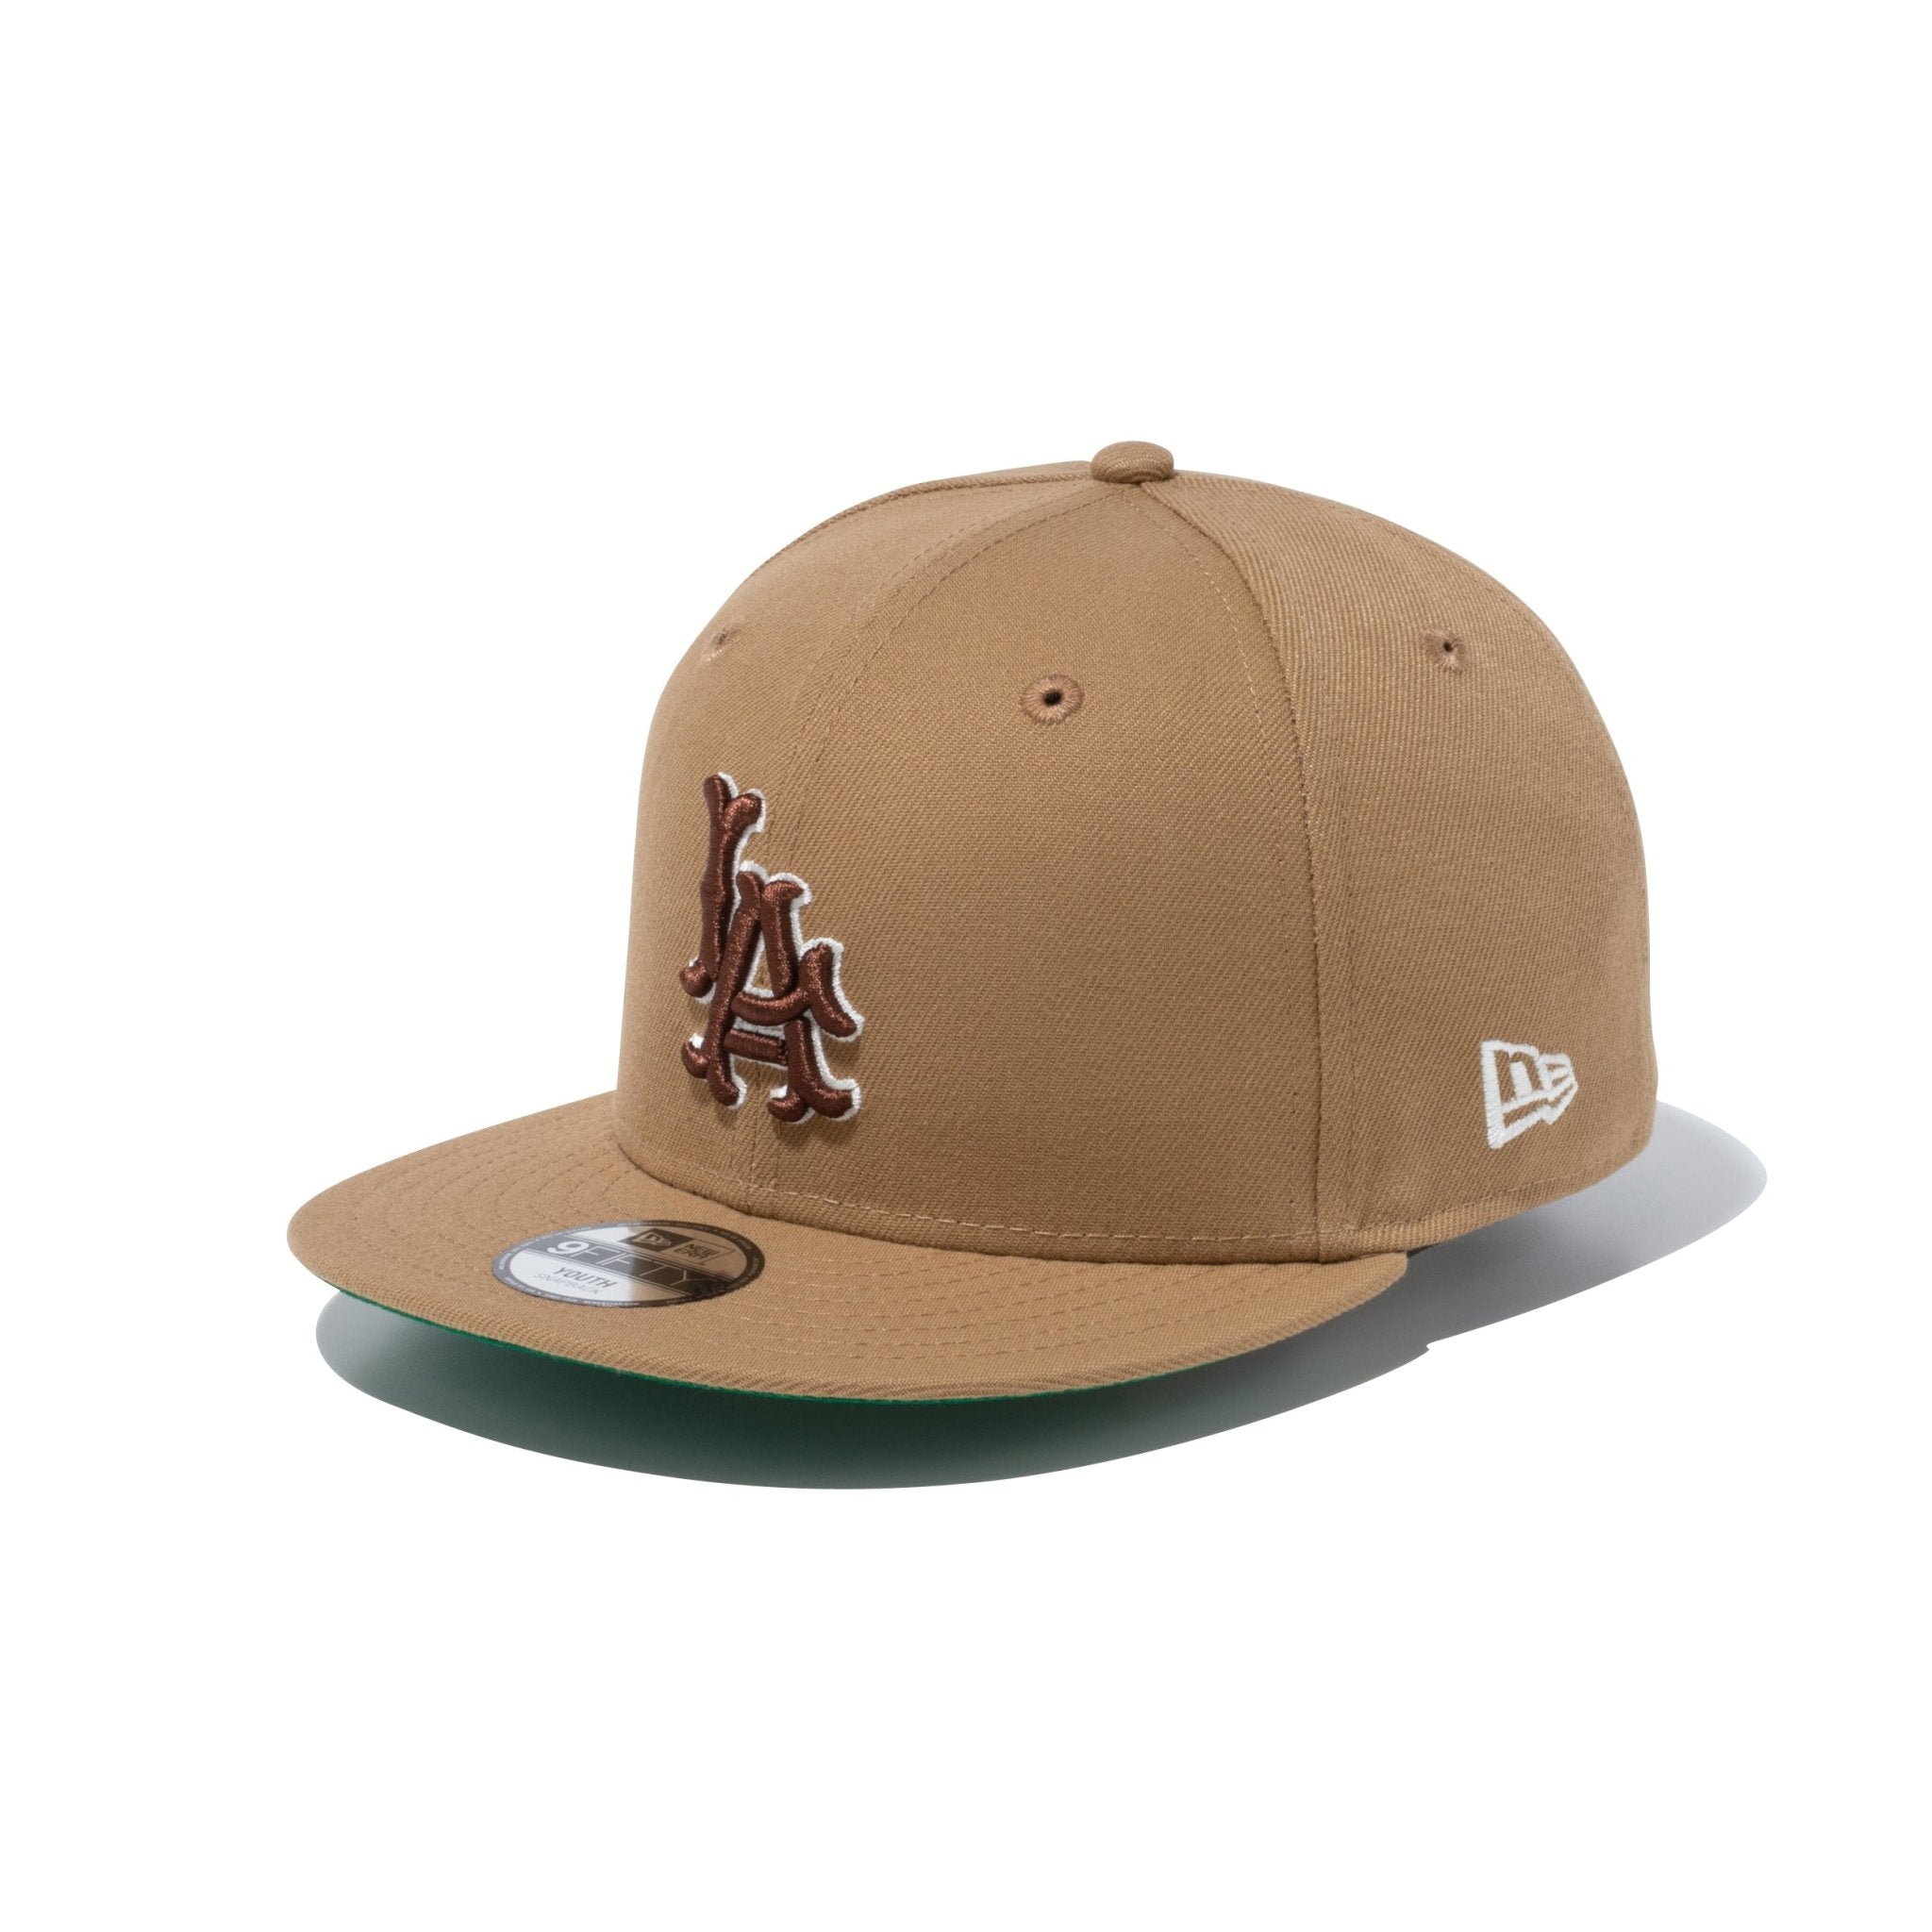 Youth 9FIFTY Cooperstown クーパーズタウン ロサンゼルス